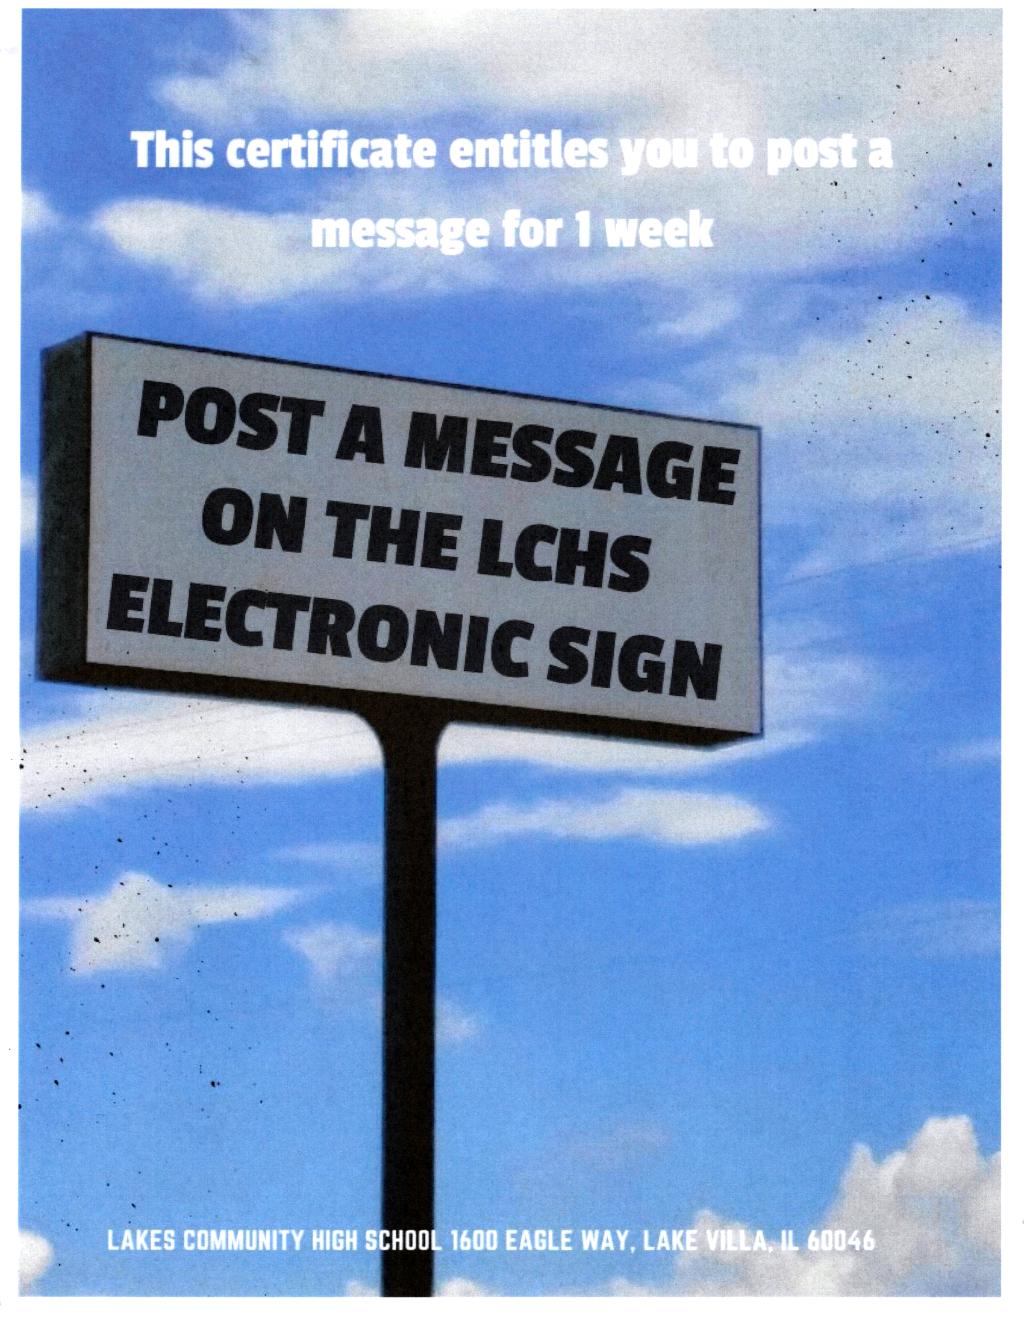 Post a message for 1 week on LCHS electronic sign